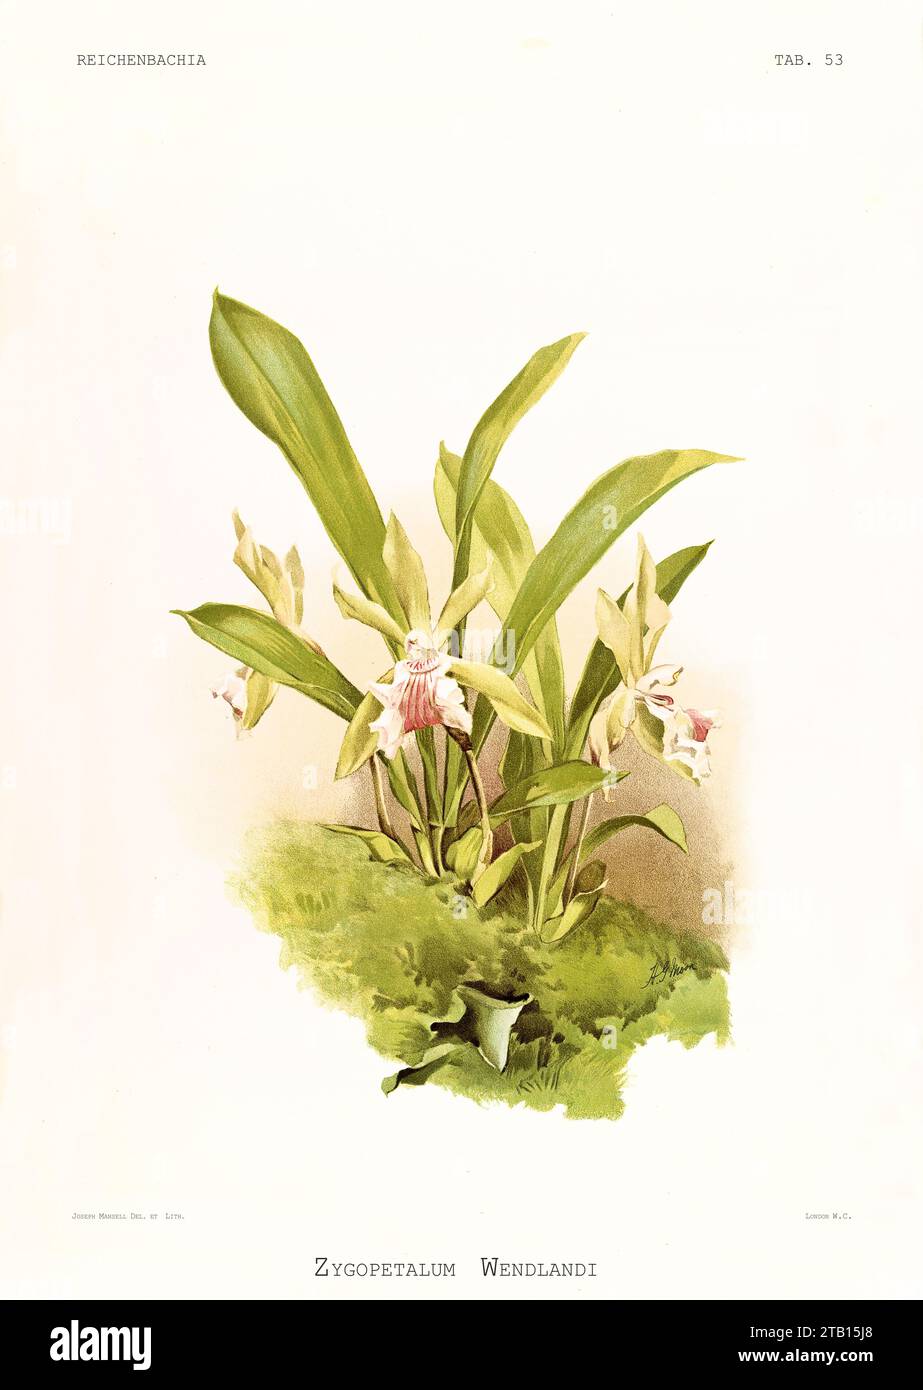 Old illustration of  Aromatic Cochleantes (Cochleanthes aromatica). Reichenbachia, by F. Sander. St. Albans, UK, 1888 - 1894 Stock Photo